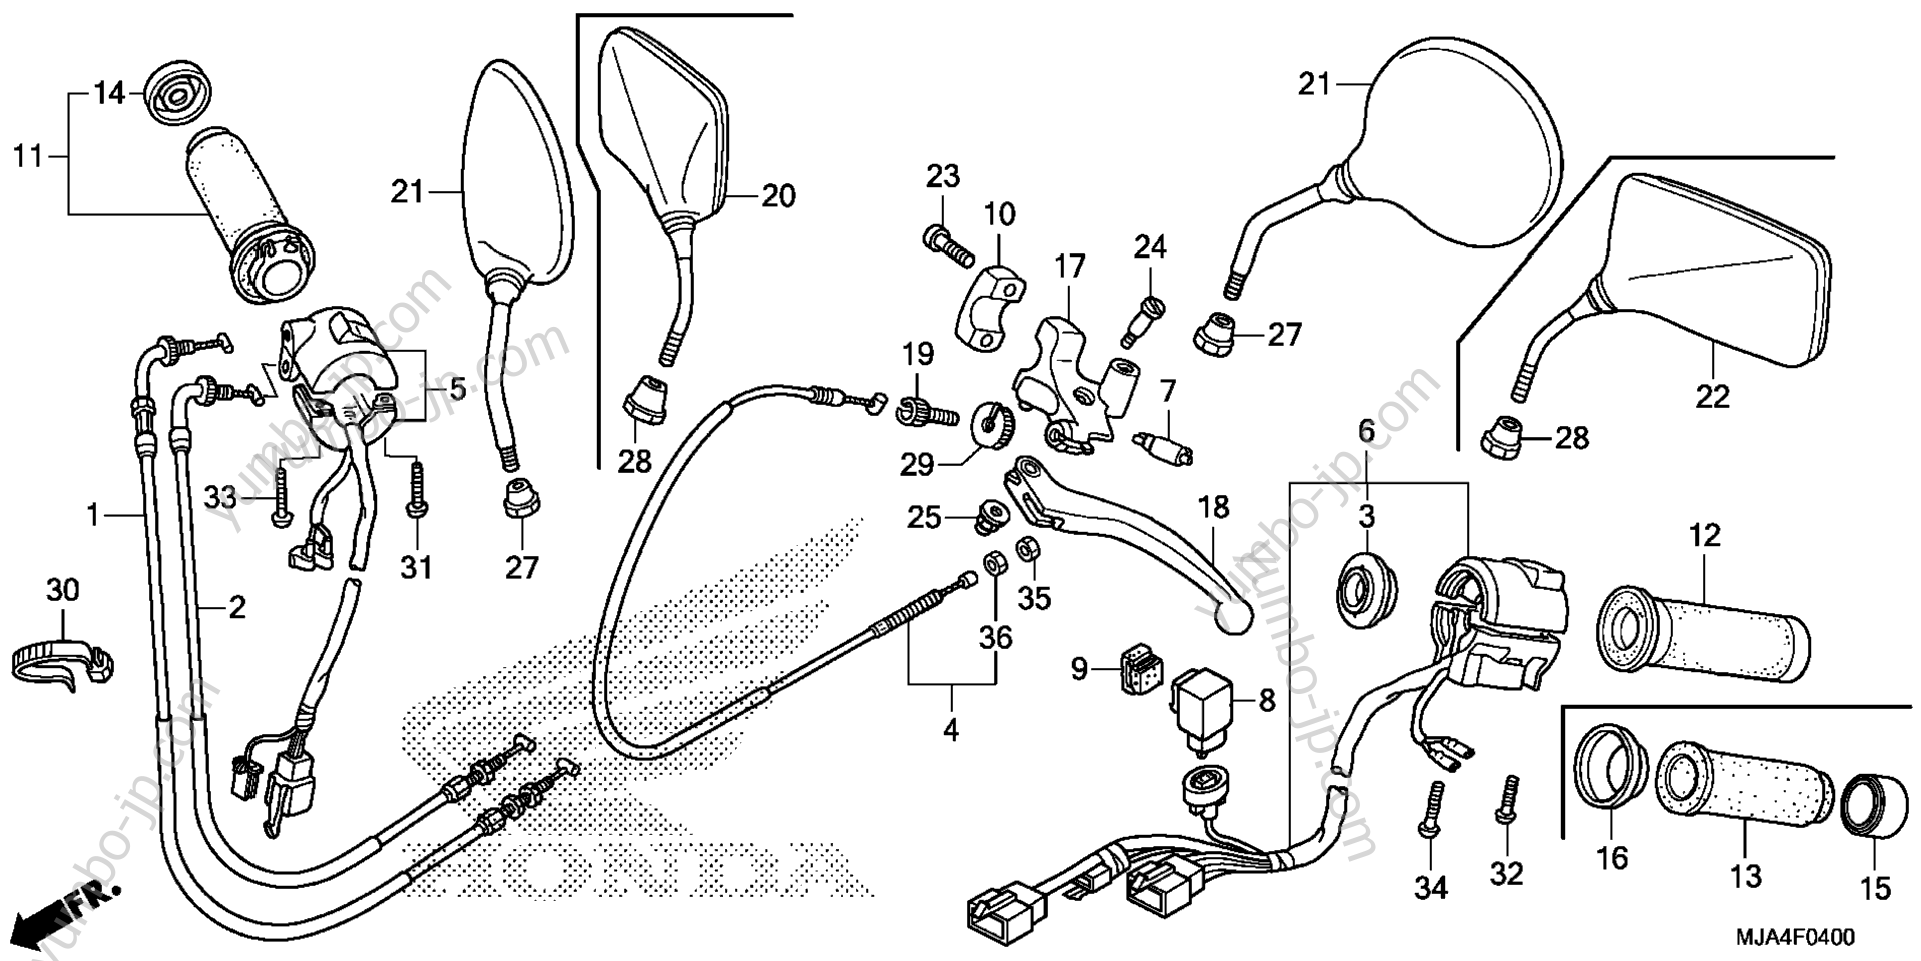 HANDLE LEVER / SWITCH / CABLE for motorcycles HONDA VT750C2F A 2012 year